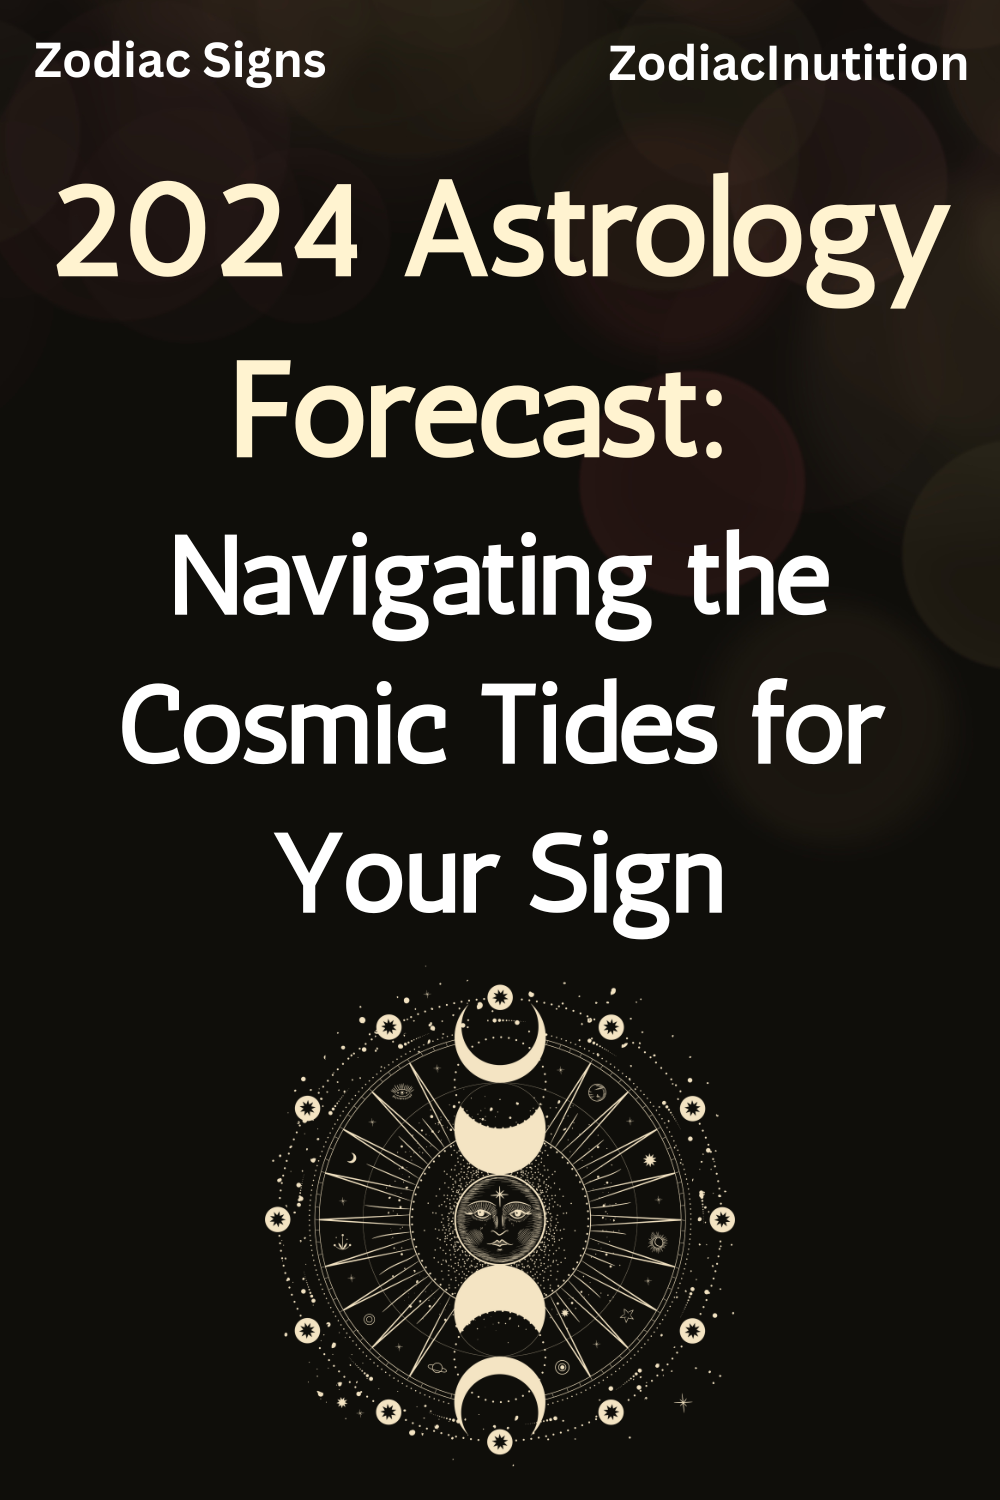 2024 Astrology Forecast: Navigating the Cosmic Tides for Your Sign